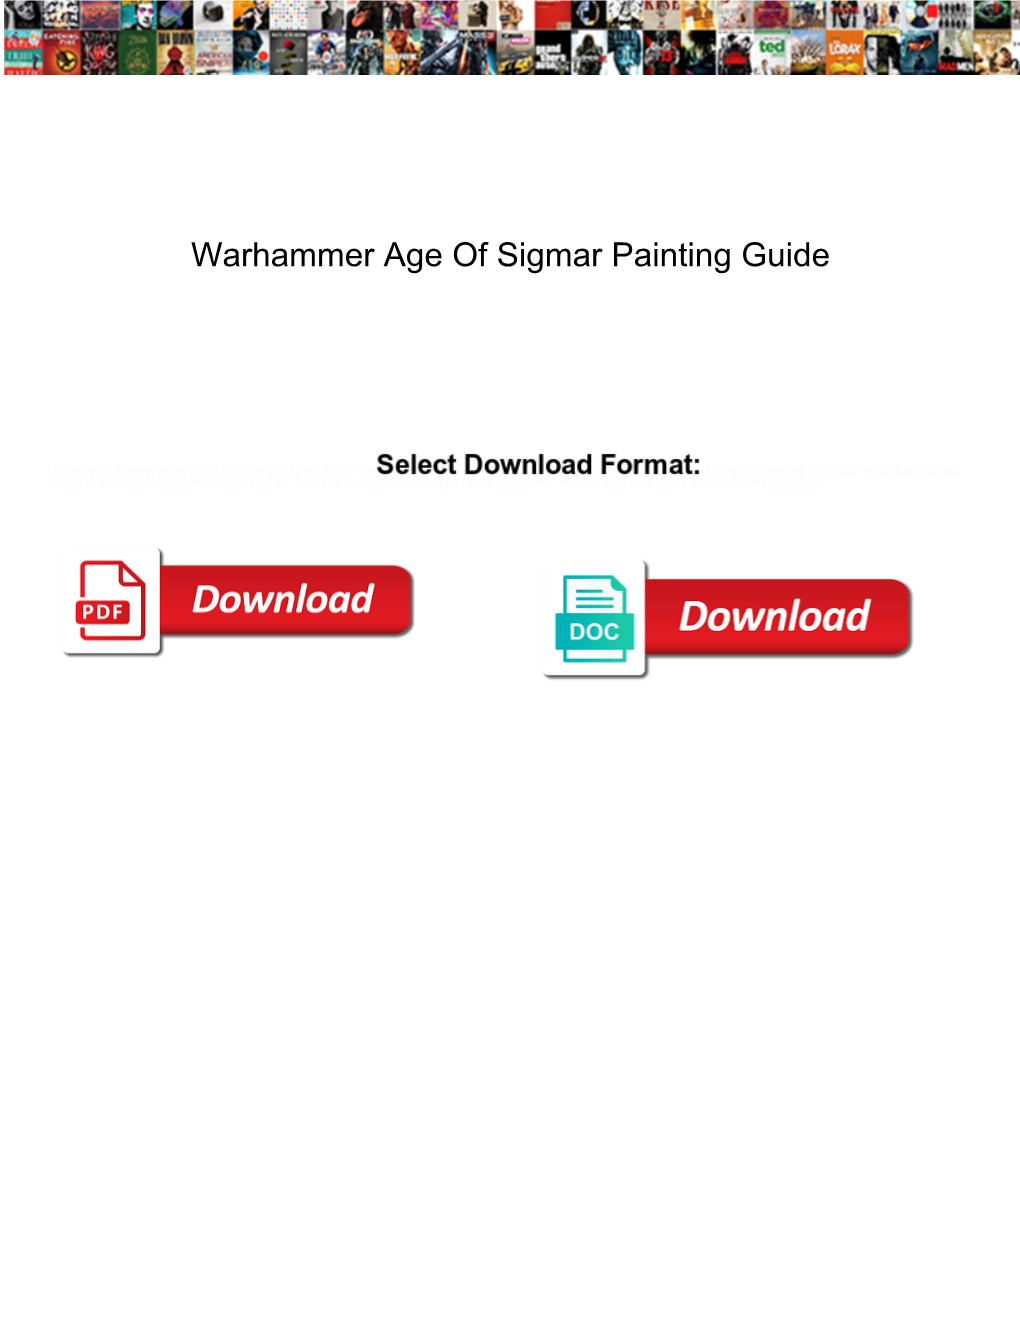 Warhammer Age of Sigmar Painting Guide